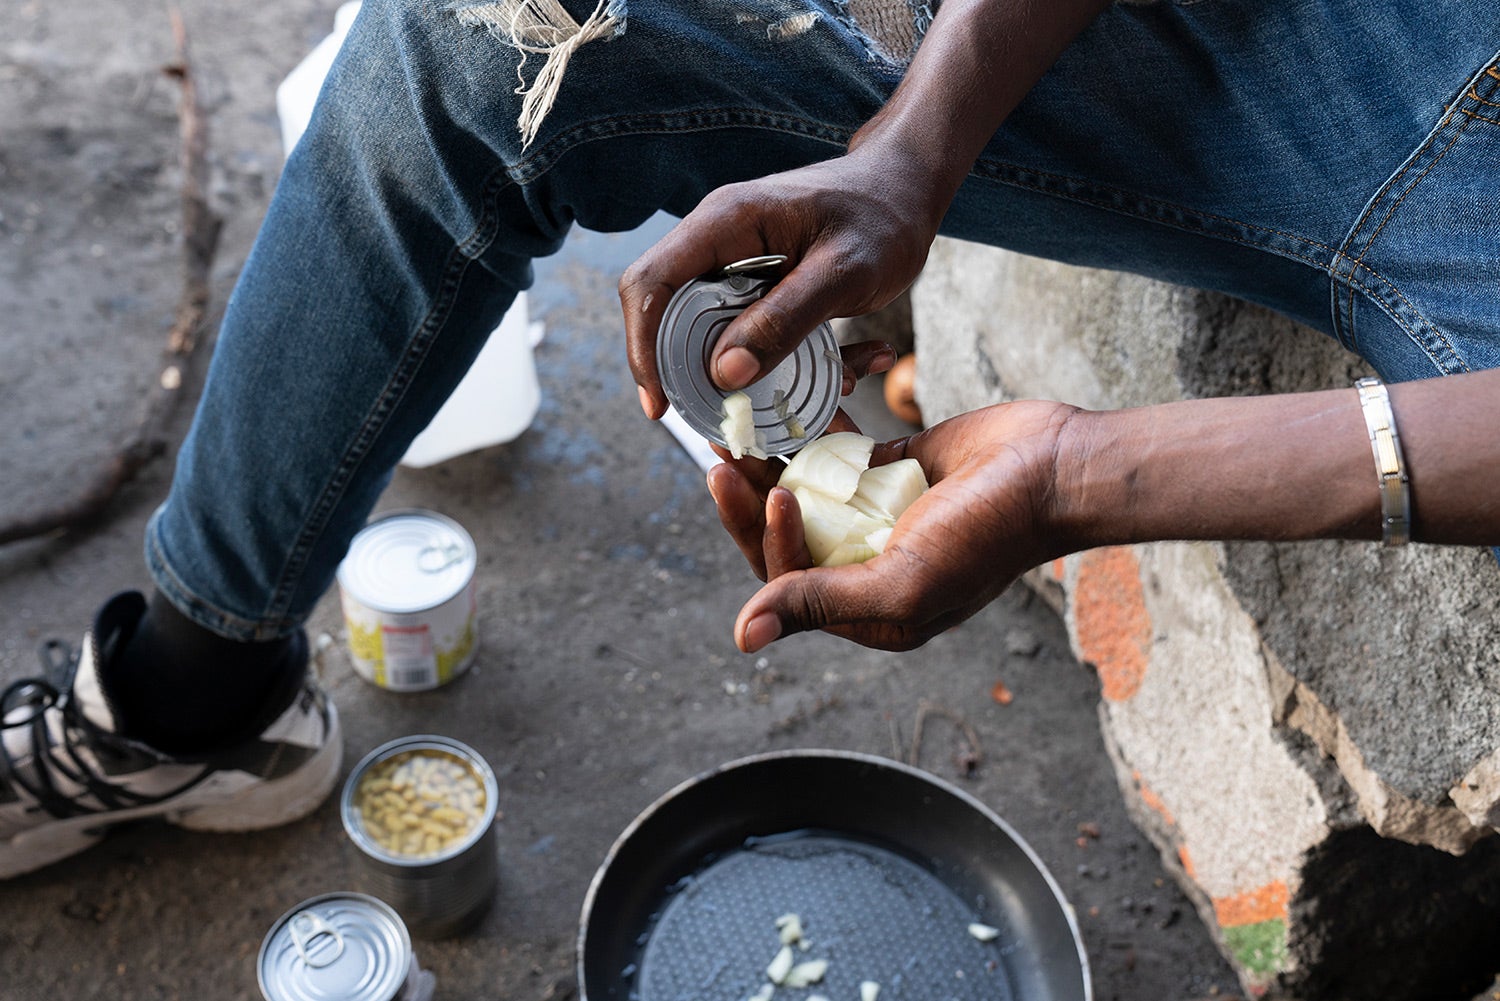 A 17-year-old Malian boy slices onions with the top of a metal can, July 2021, Calais, France.